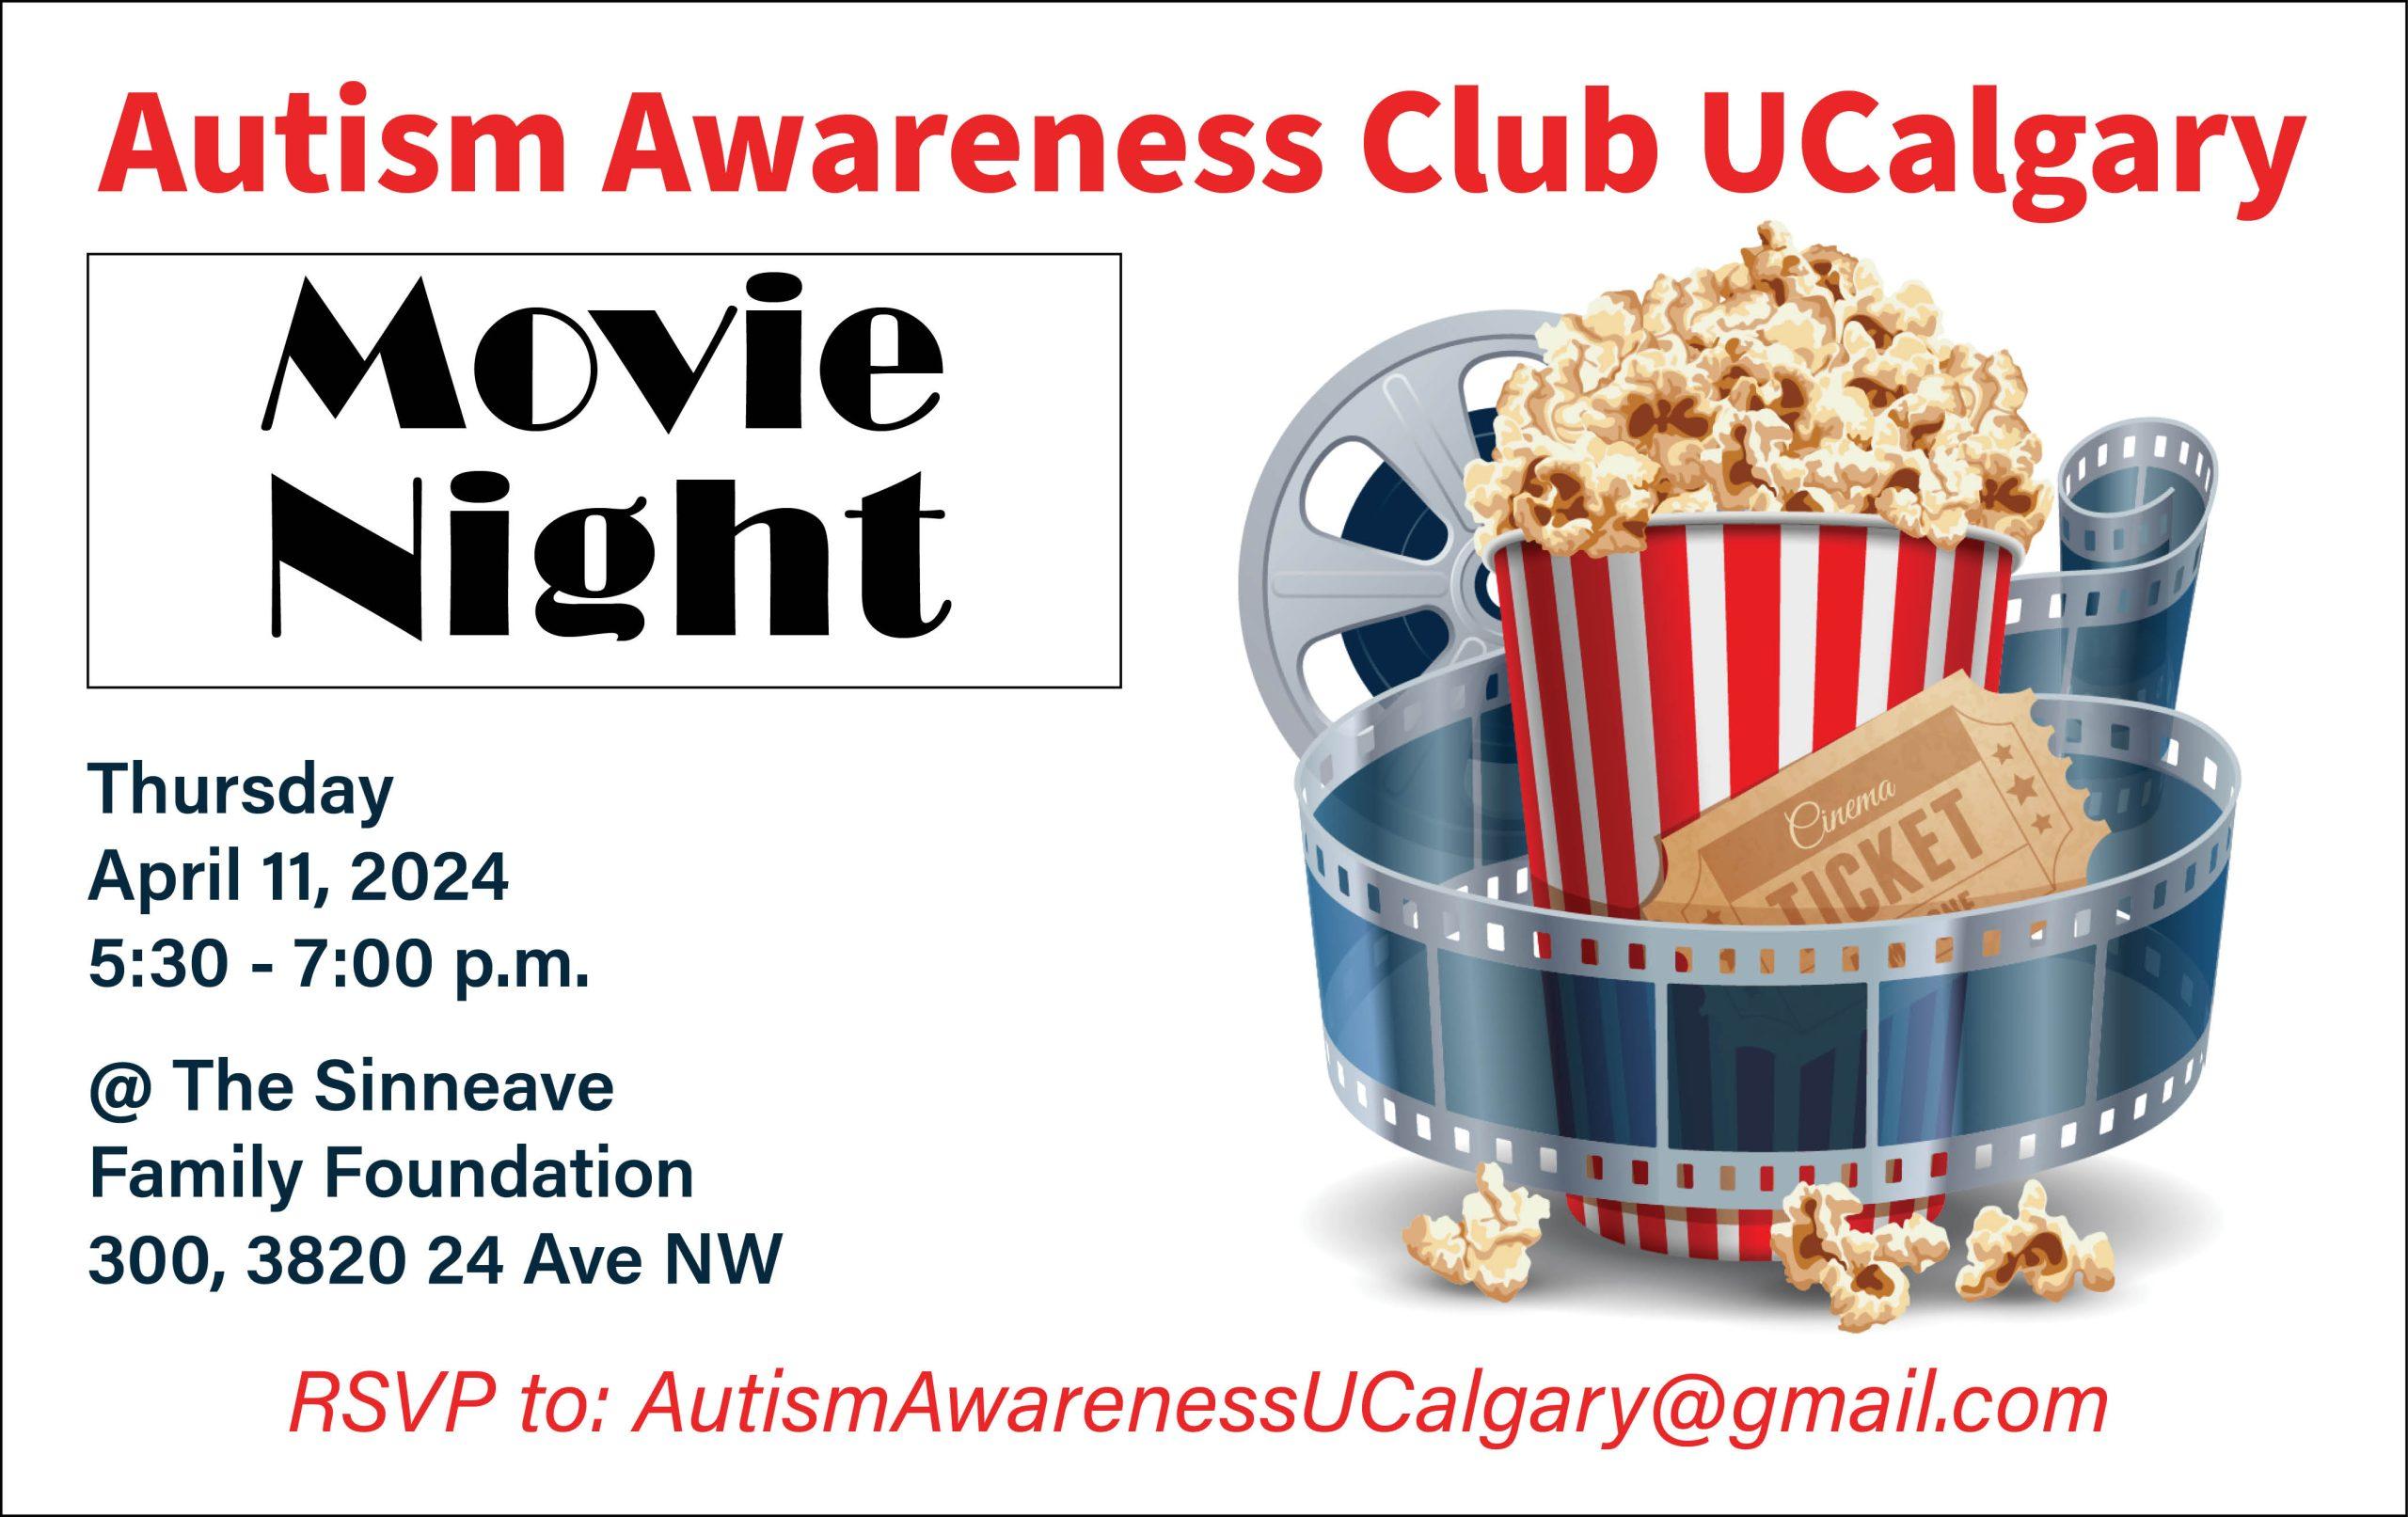 On a white background, in red reads Autism Awareness Club UCalgary. In black reads, Movie Night followed by the words, "Thursday April 11, 2024 5:30 to 7pm at The Sinneave Family Foundation. The text at the bottom in red reads, "RSVP to: autismawarenessucalgary@gmail.com